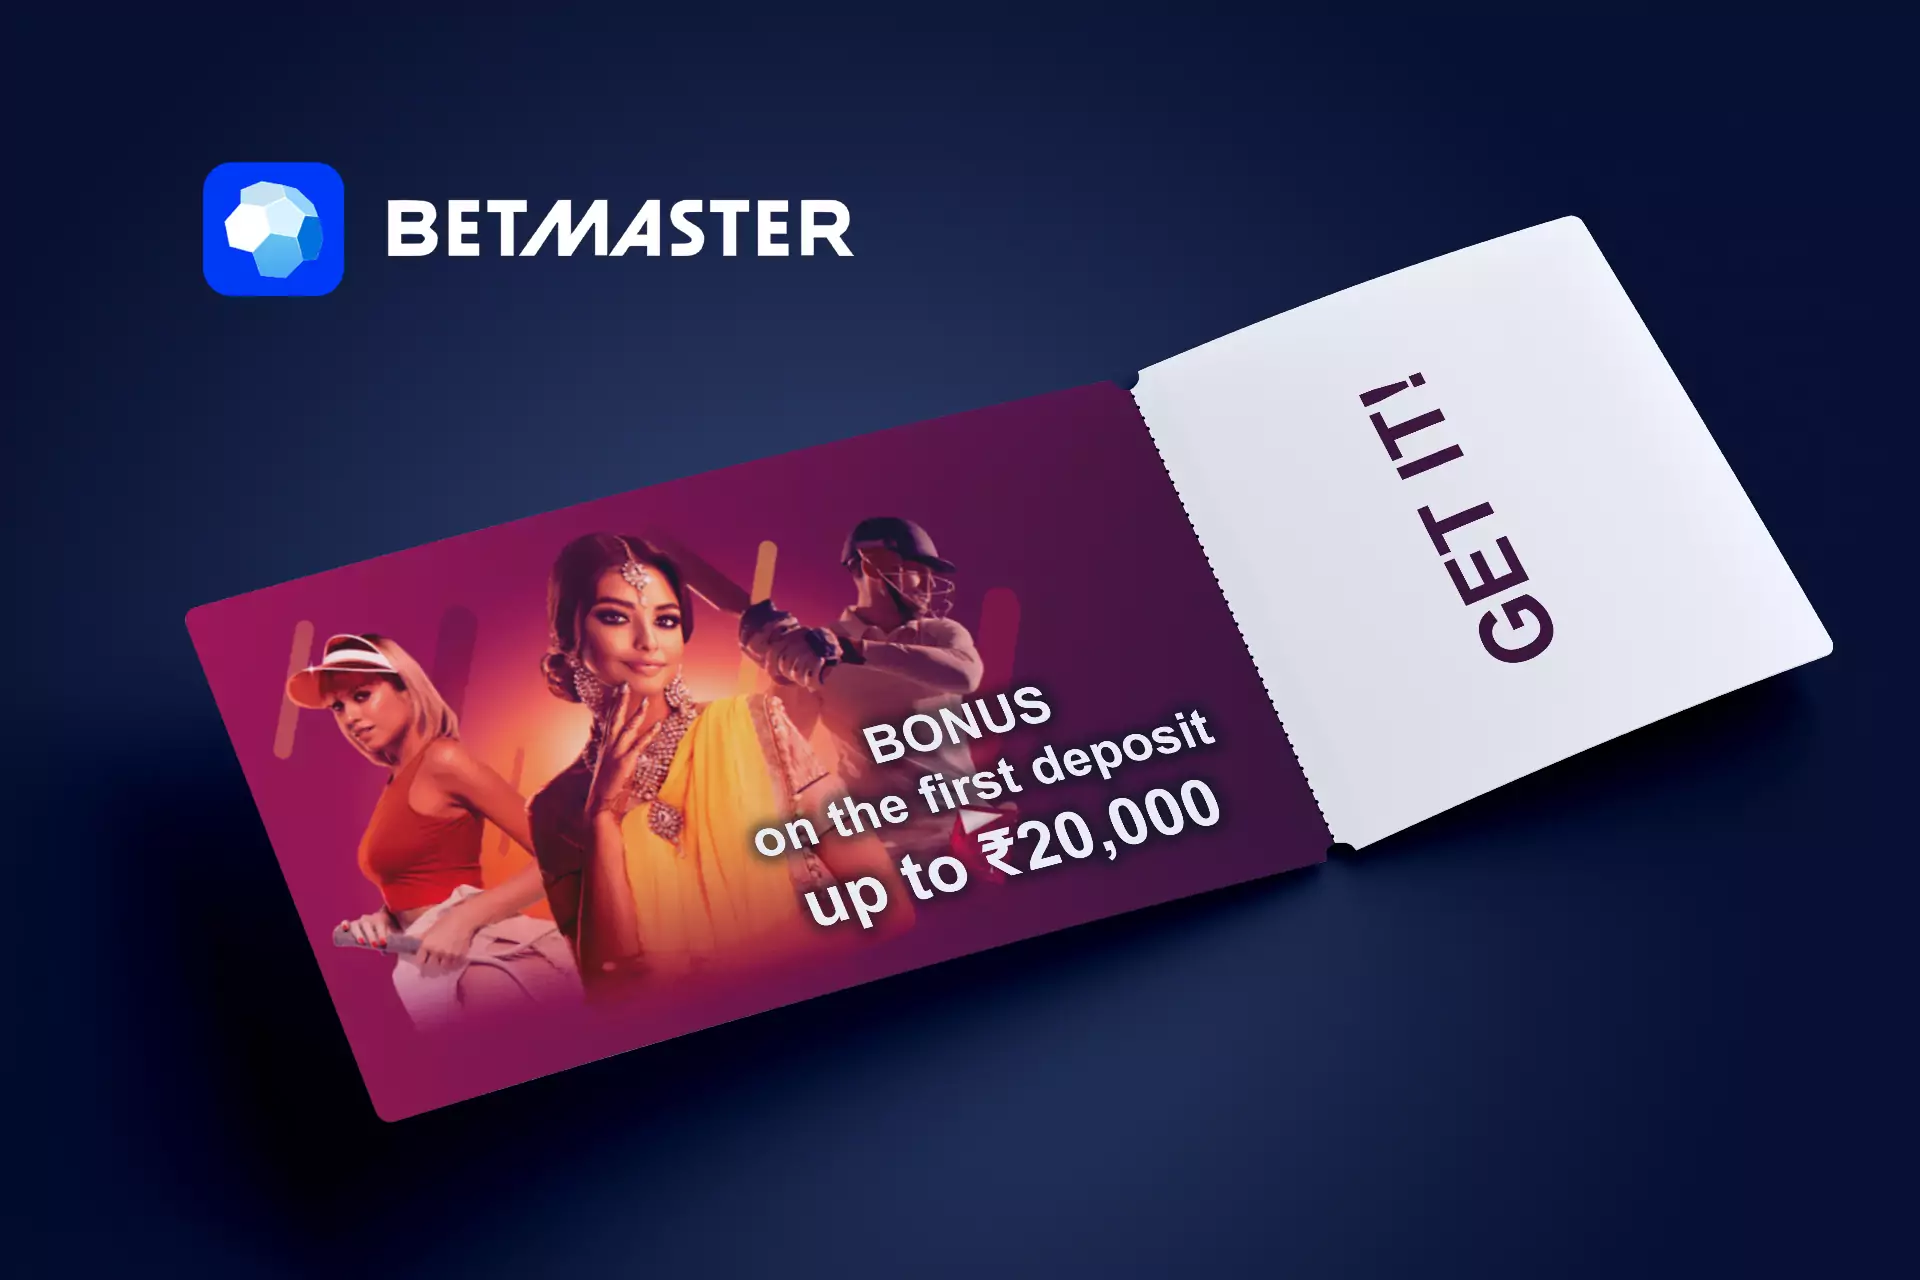 The main welcome offer of the Betmaster is the bonus on the first deposit.